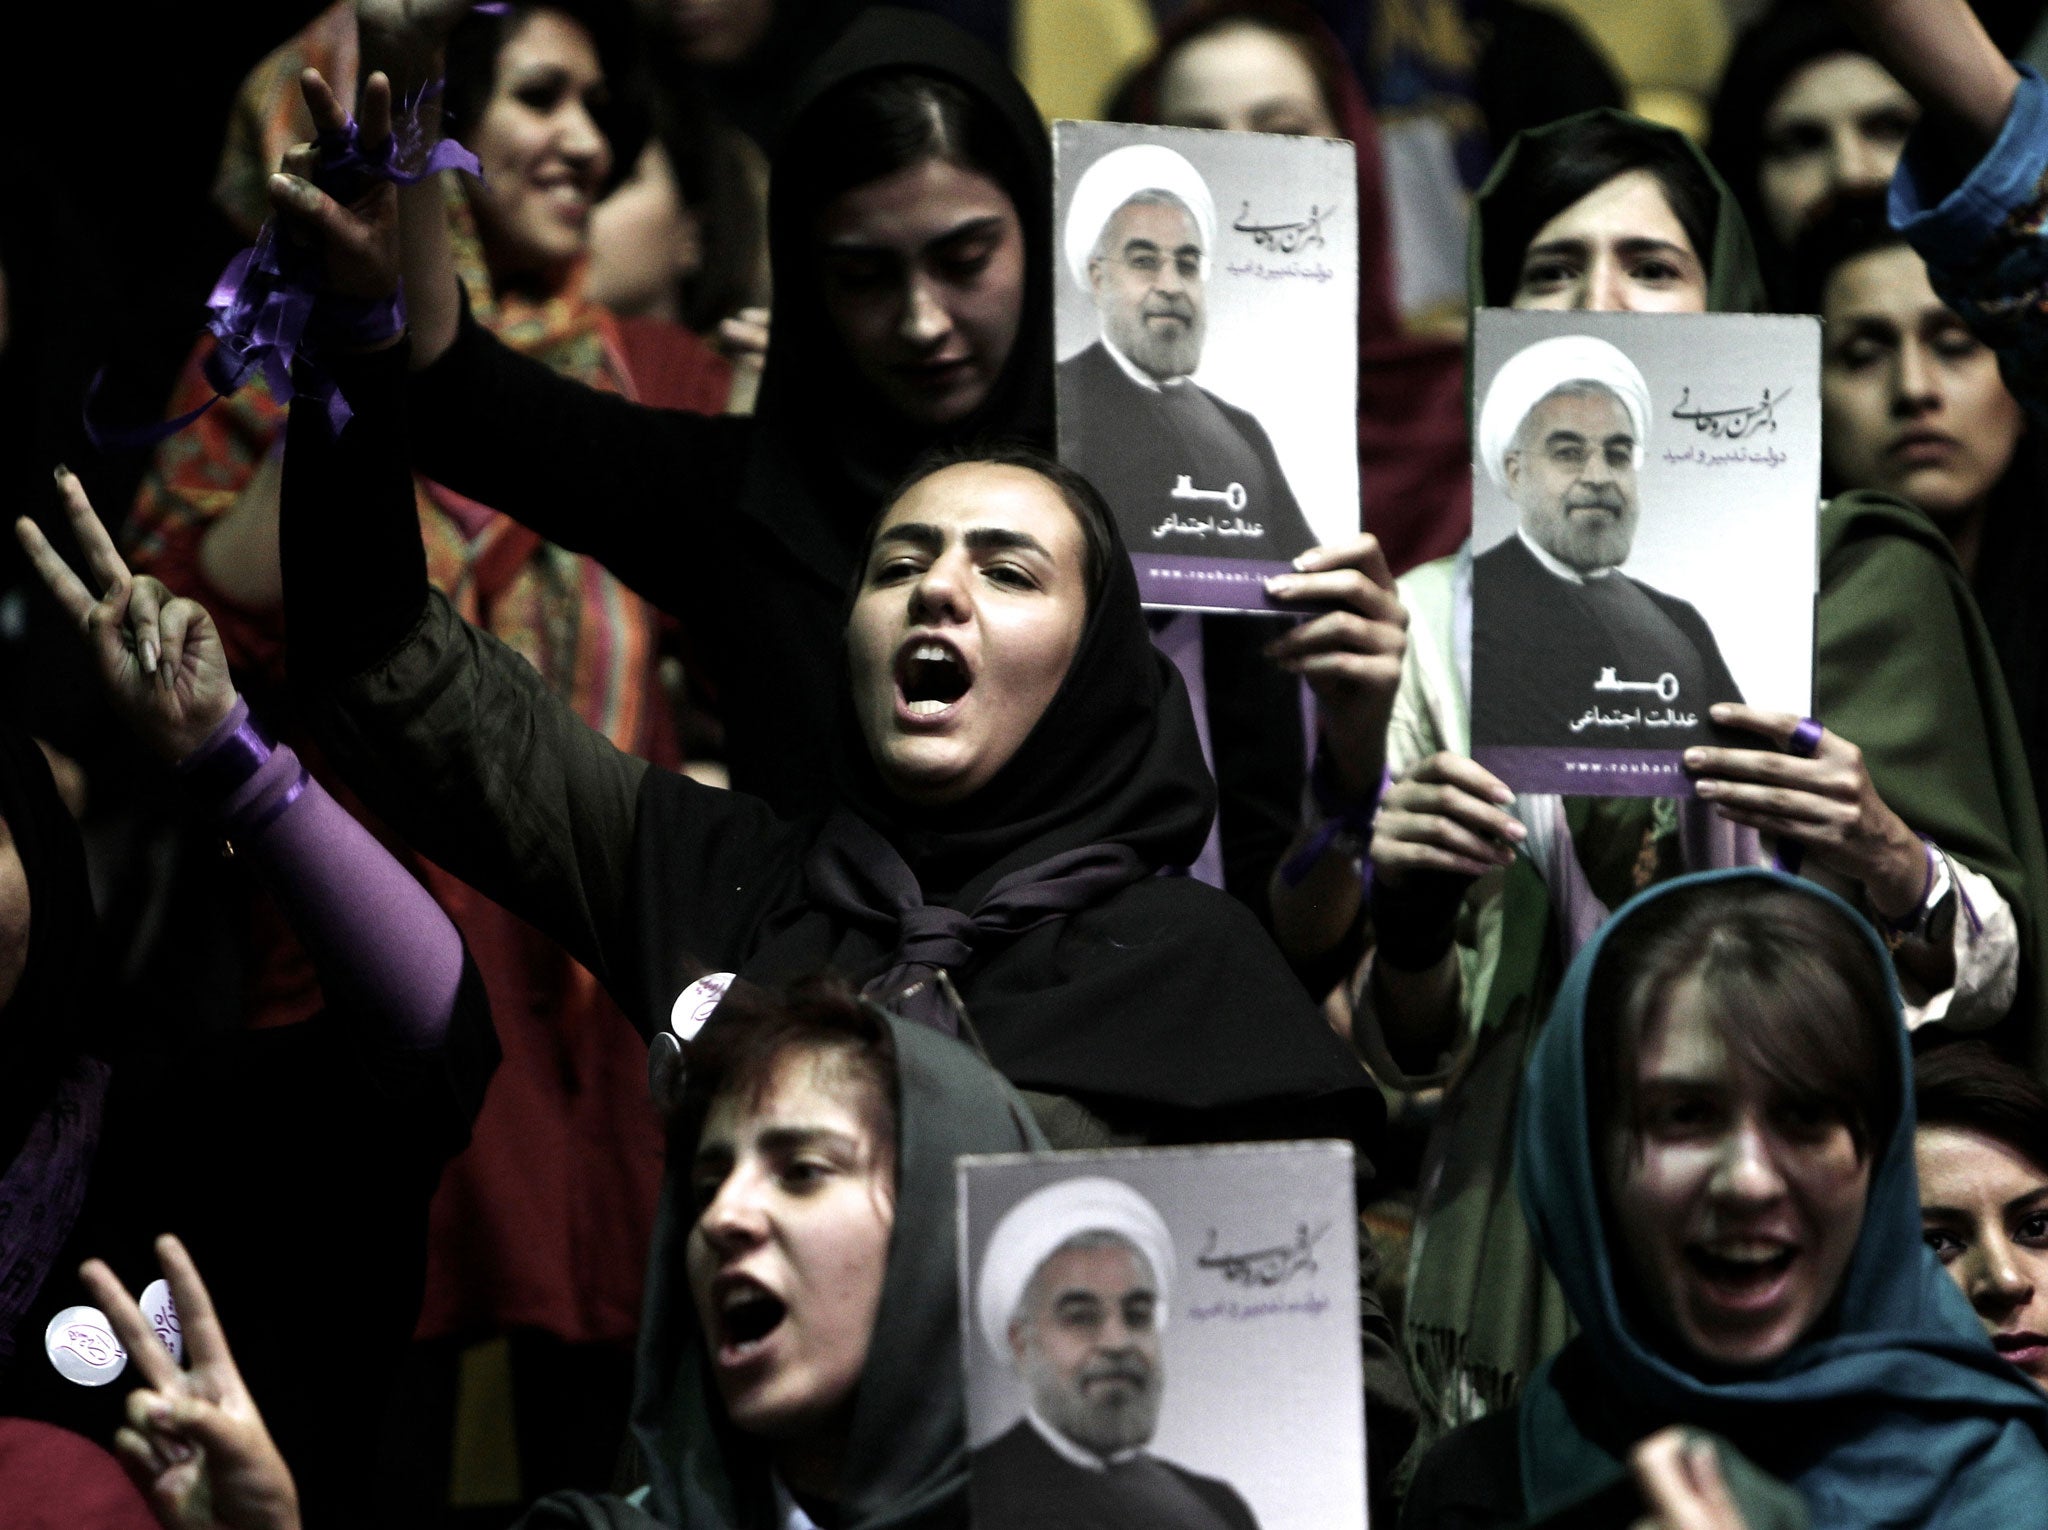 Iranian supporters of Hassan Rowhani, a moderate Iranian presidential candidate and former top nuclear negotiator, hold his portrait during a campaign rally in downtown Tehran on June 8, 2013.